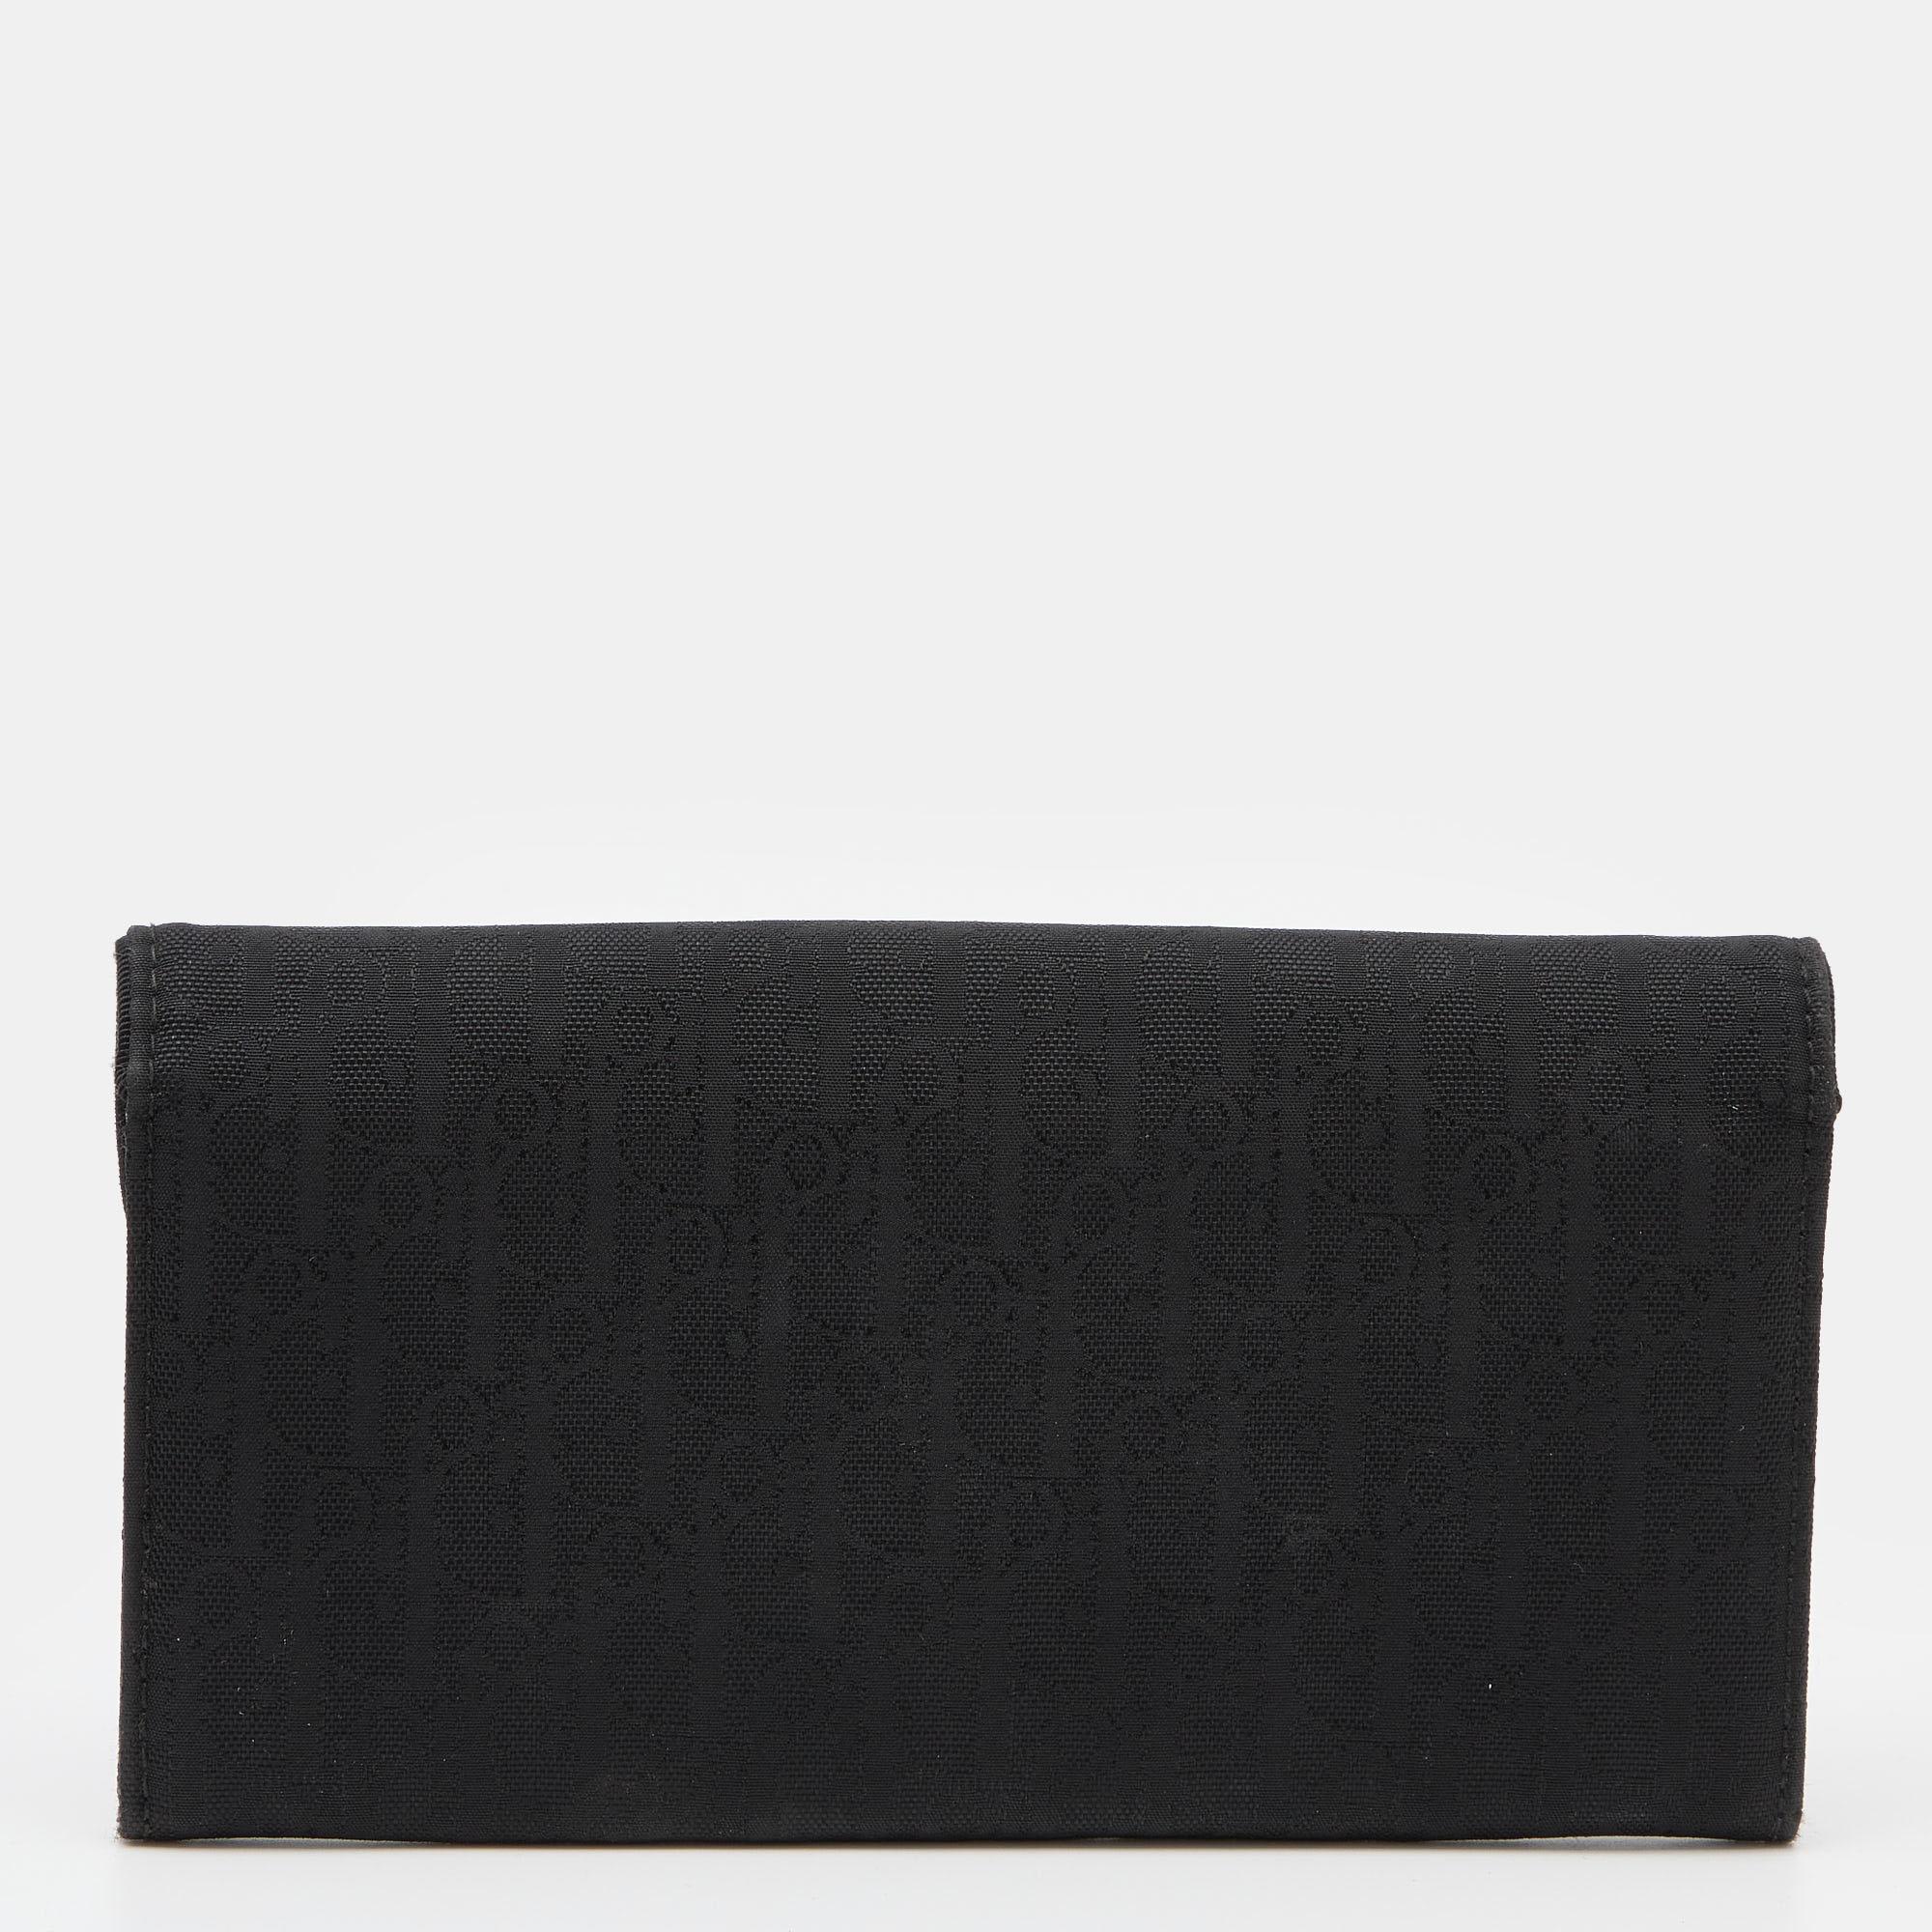 Covered in the brand's signature Oblique canvas, this Dior wallet has a classy essence. Lined with fabric, its interior is divided into different compartments to keep your monetary essentials safe. It features the brand signature on the front flap